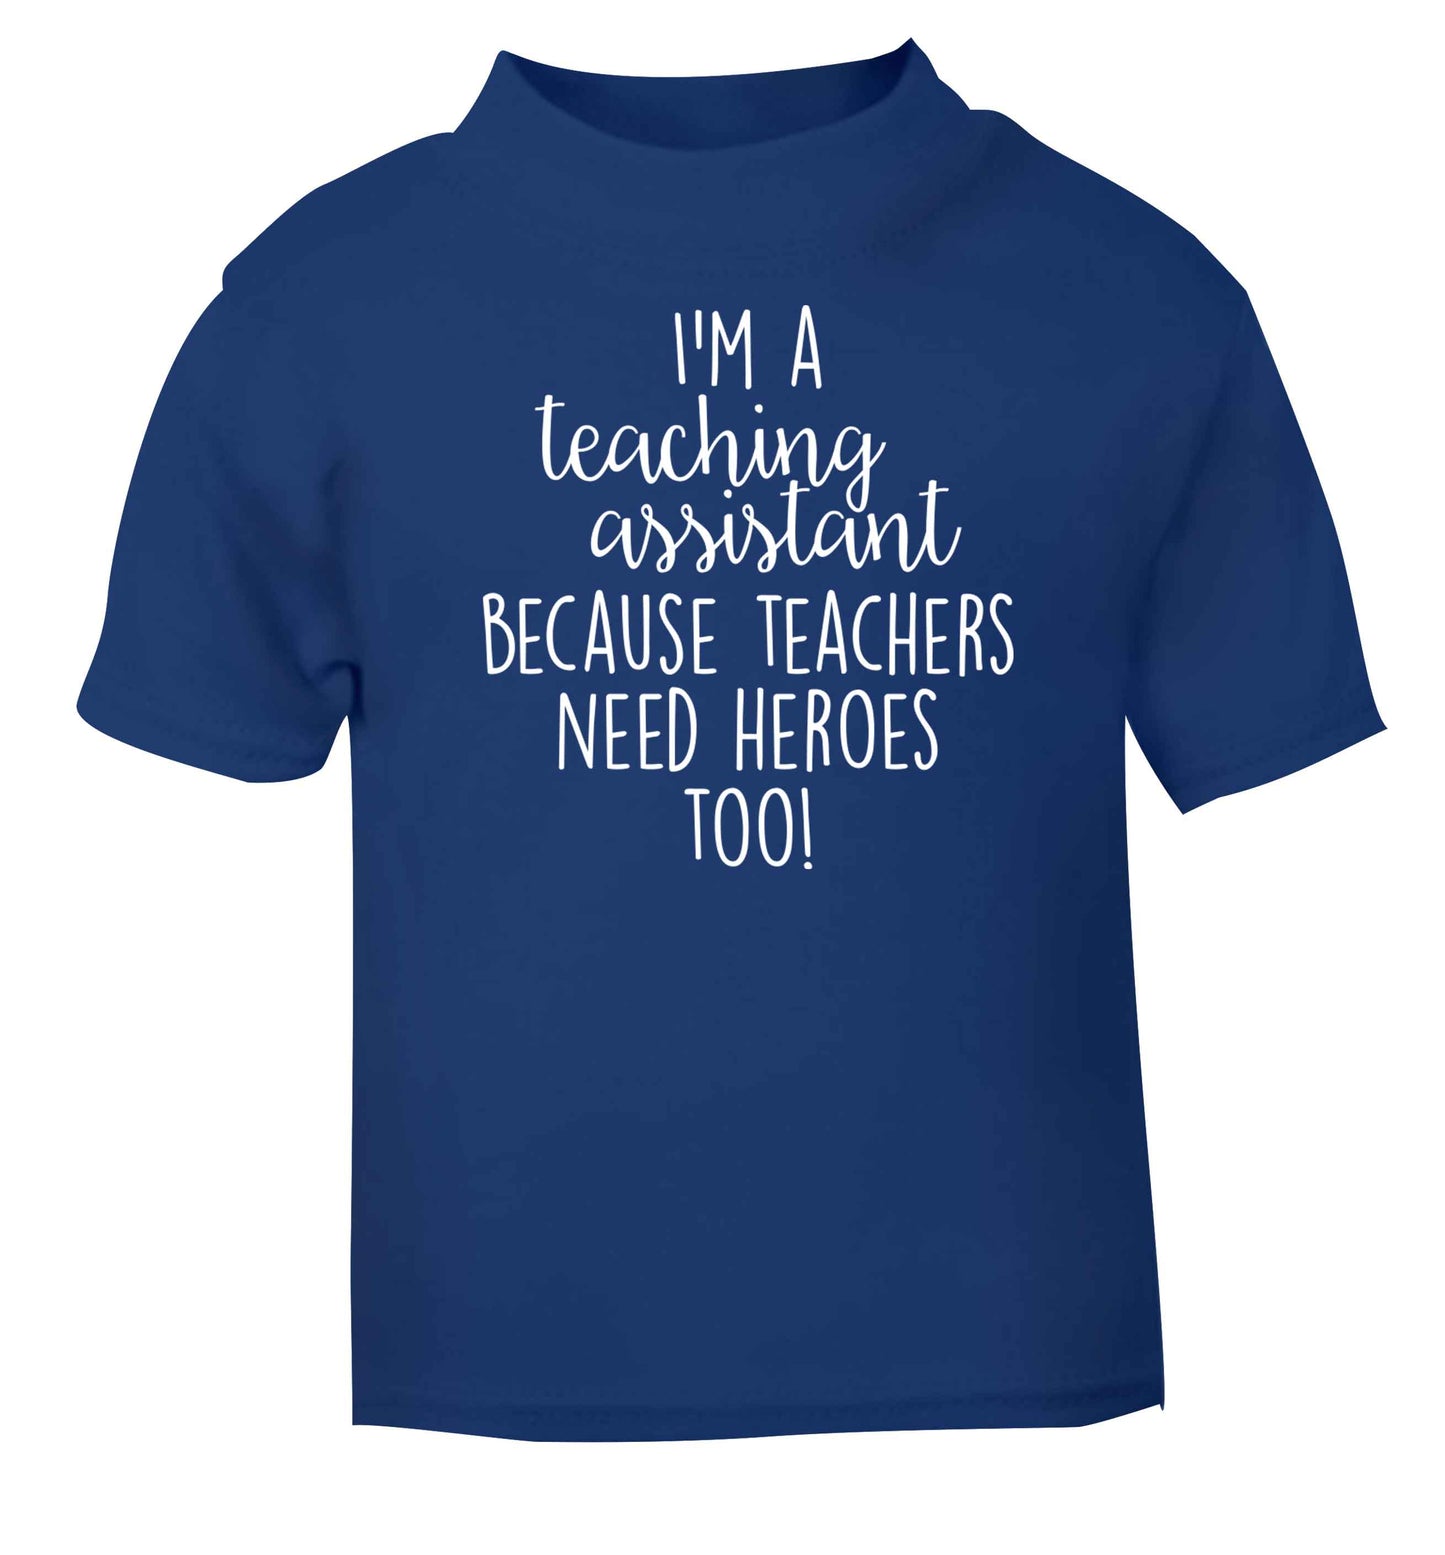 I'm a teaching assistant because teachers need heroes too! blue baby toddler Tshirt 2 Years